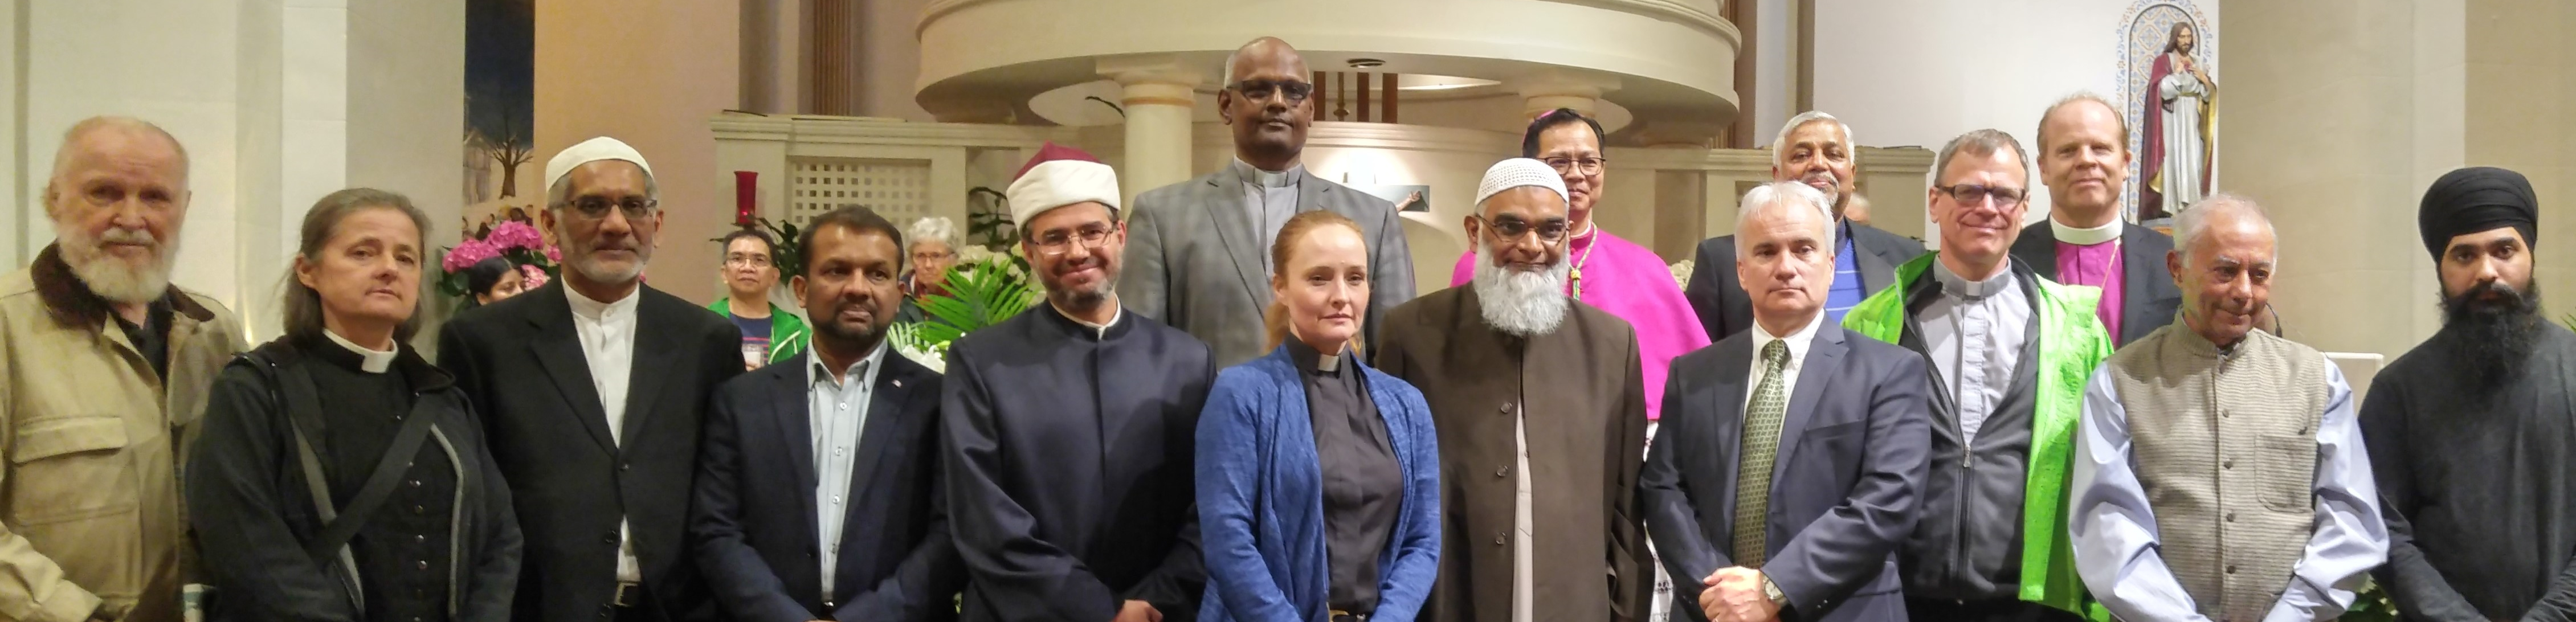 Ring of Peace for Interreligious dialogue-B